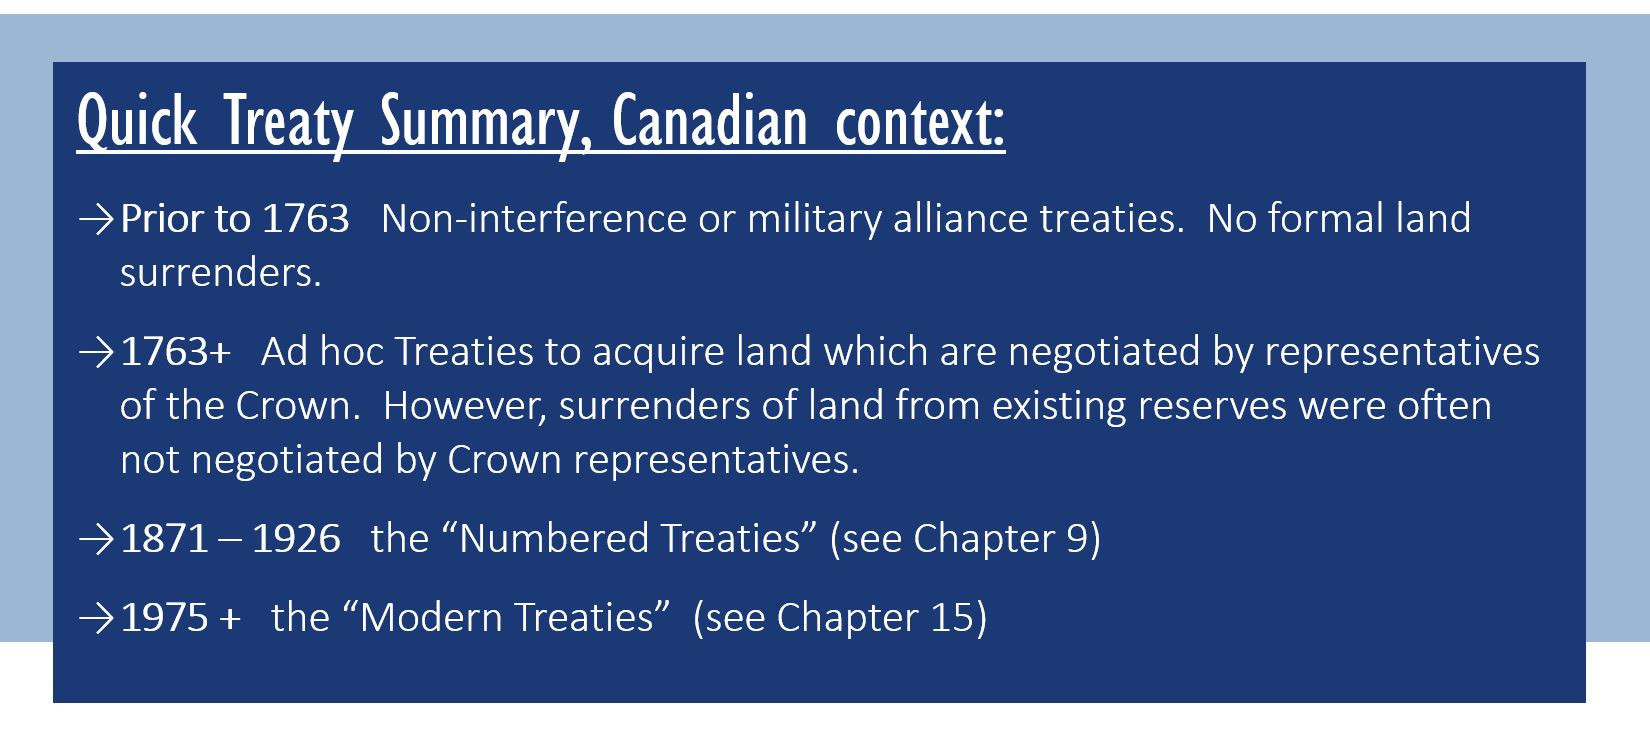 Quick Treaty Summary, Canadian context: Prior to 1763   Non-interference or military alliance treaties.  No formal land surrenders. 1763+   Ad hoc Treaties to acquire land which are negotiated by representatives of the Crown.  However, surrenders of land from existing reserves were often not negotiated by Crown representatives. 1871 – 1926   the “Numbered Treaties” (see Chapter 9) 1975 +   the “Modern Treaties”  (see Chapter 15)